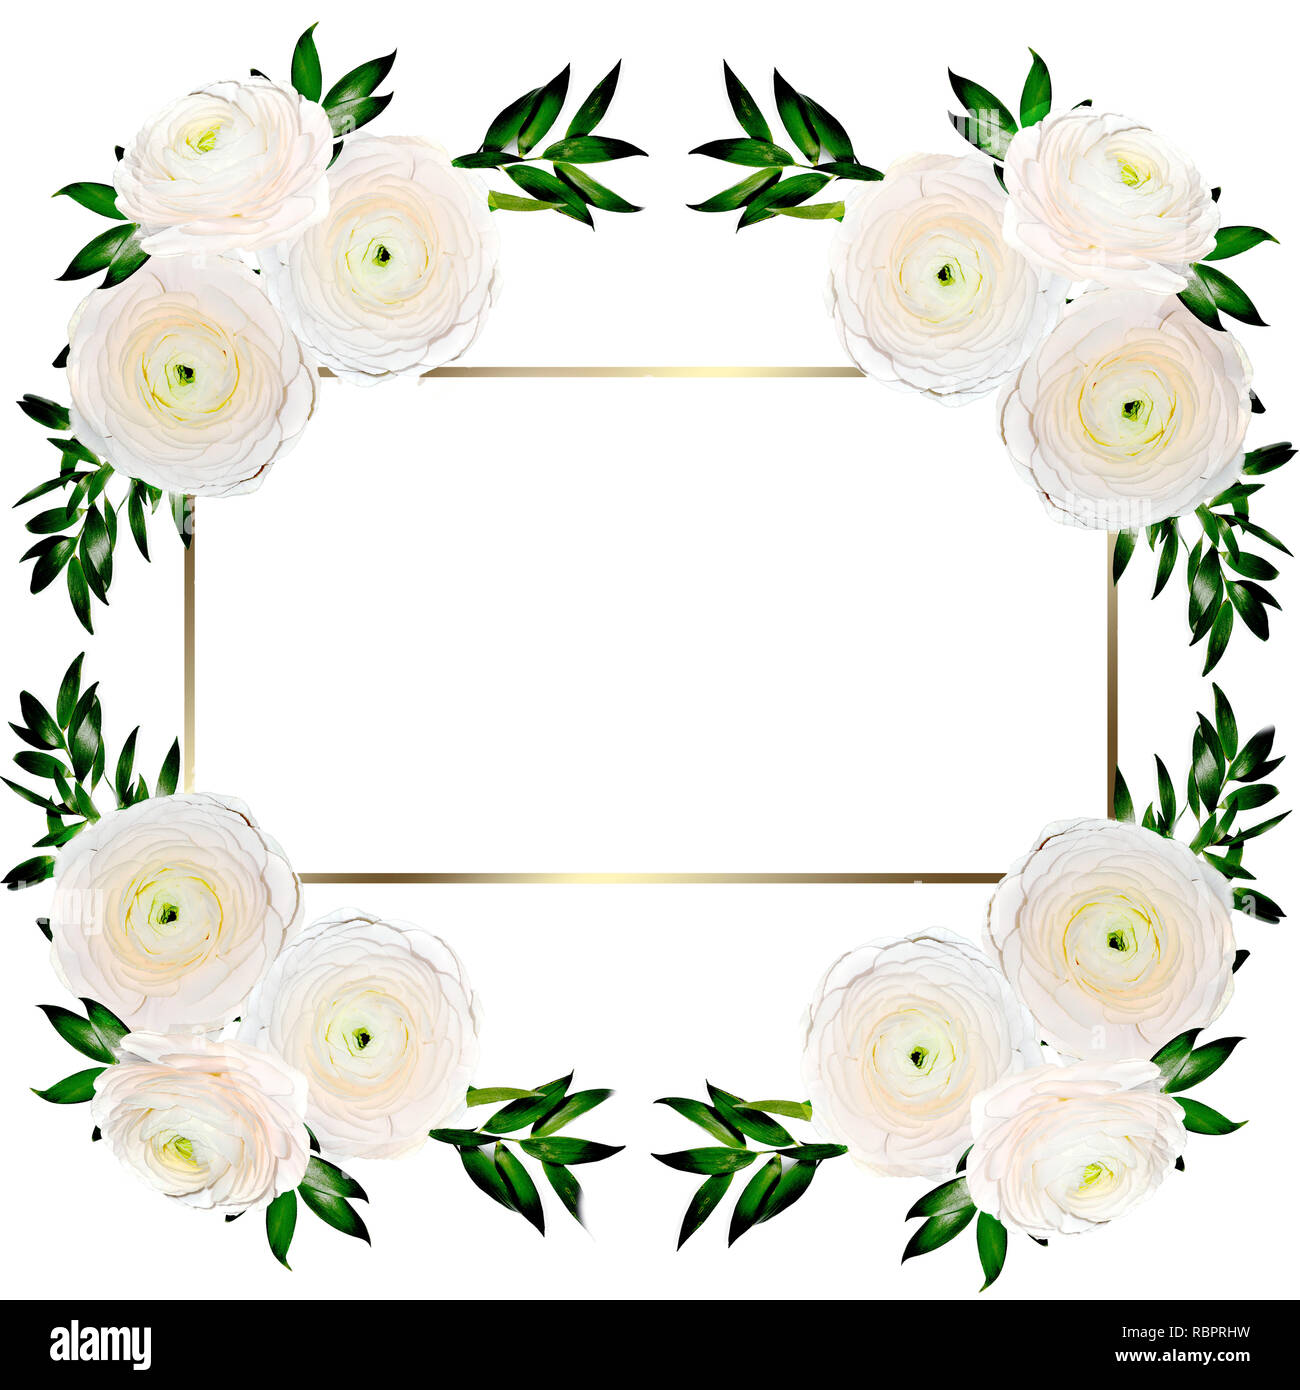 Delicate floral frame with creamy colored ranunculus flowers isolated on white. Design for wedding invitation or greeting card to birthday or other ho Stock Photo